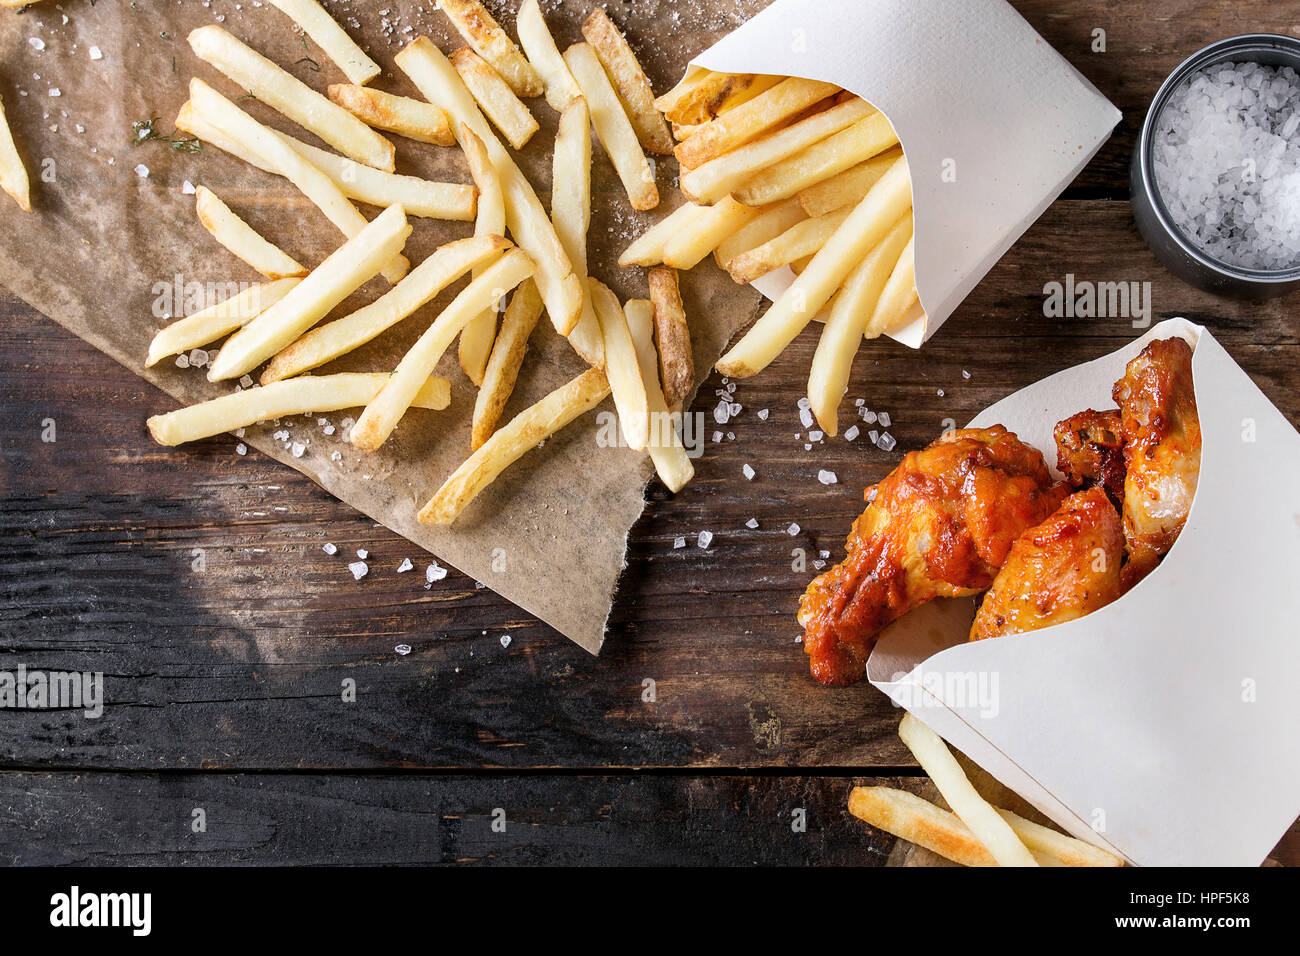 Fast food fried spicy chicken legs, wings and french fries potatoes in lunch boxes with salt and ketchup sauce served on baking paper over old dark wo Stock Photo